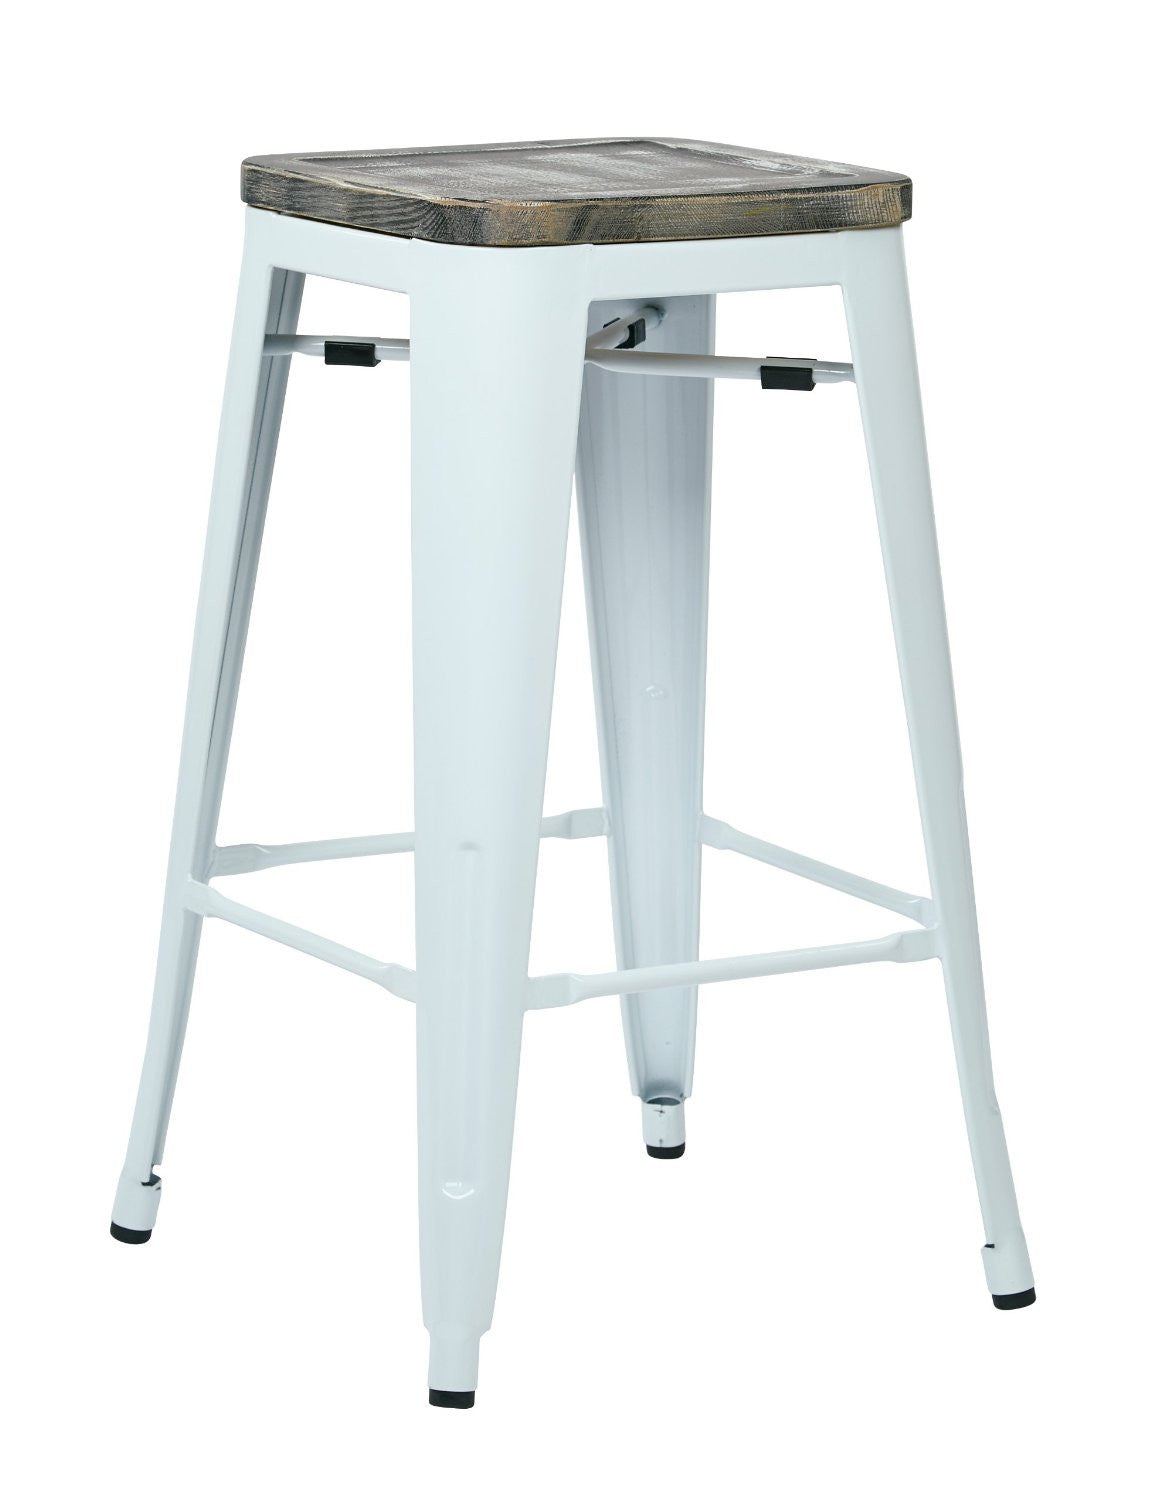 Osp Designs Brw312611a2-c306 Bristow 26" Antique Metal Barstool With Vintage Wood Seat, White Finish Frame & Ash Crazy Horse Finish Seat, 2 Pack